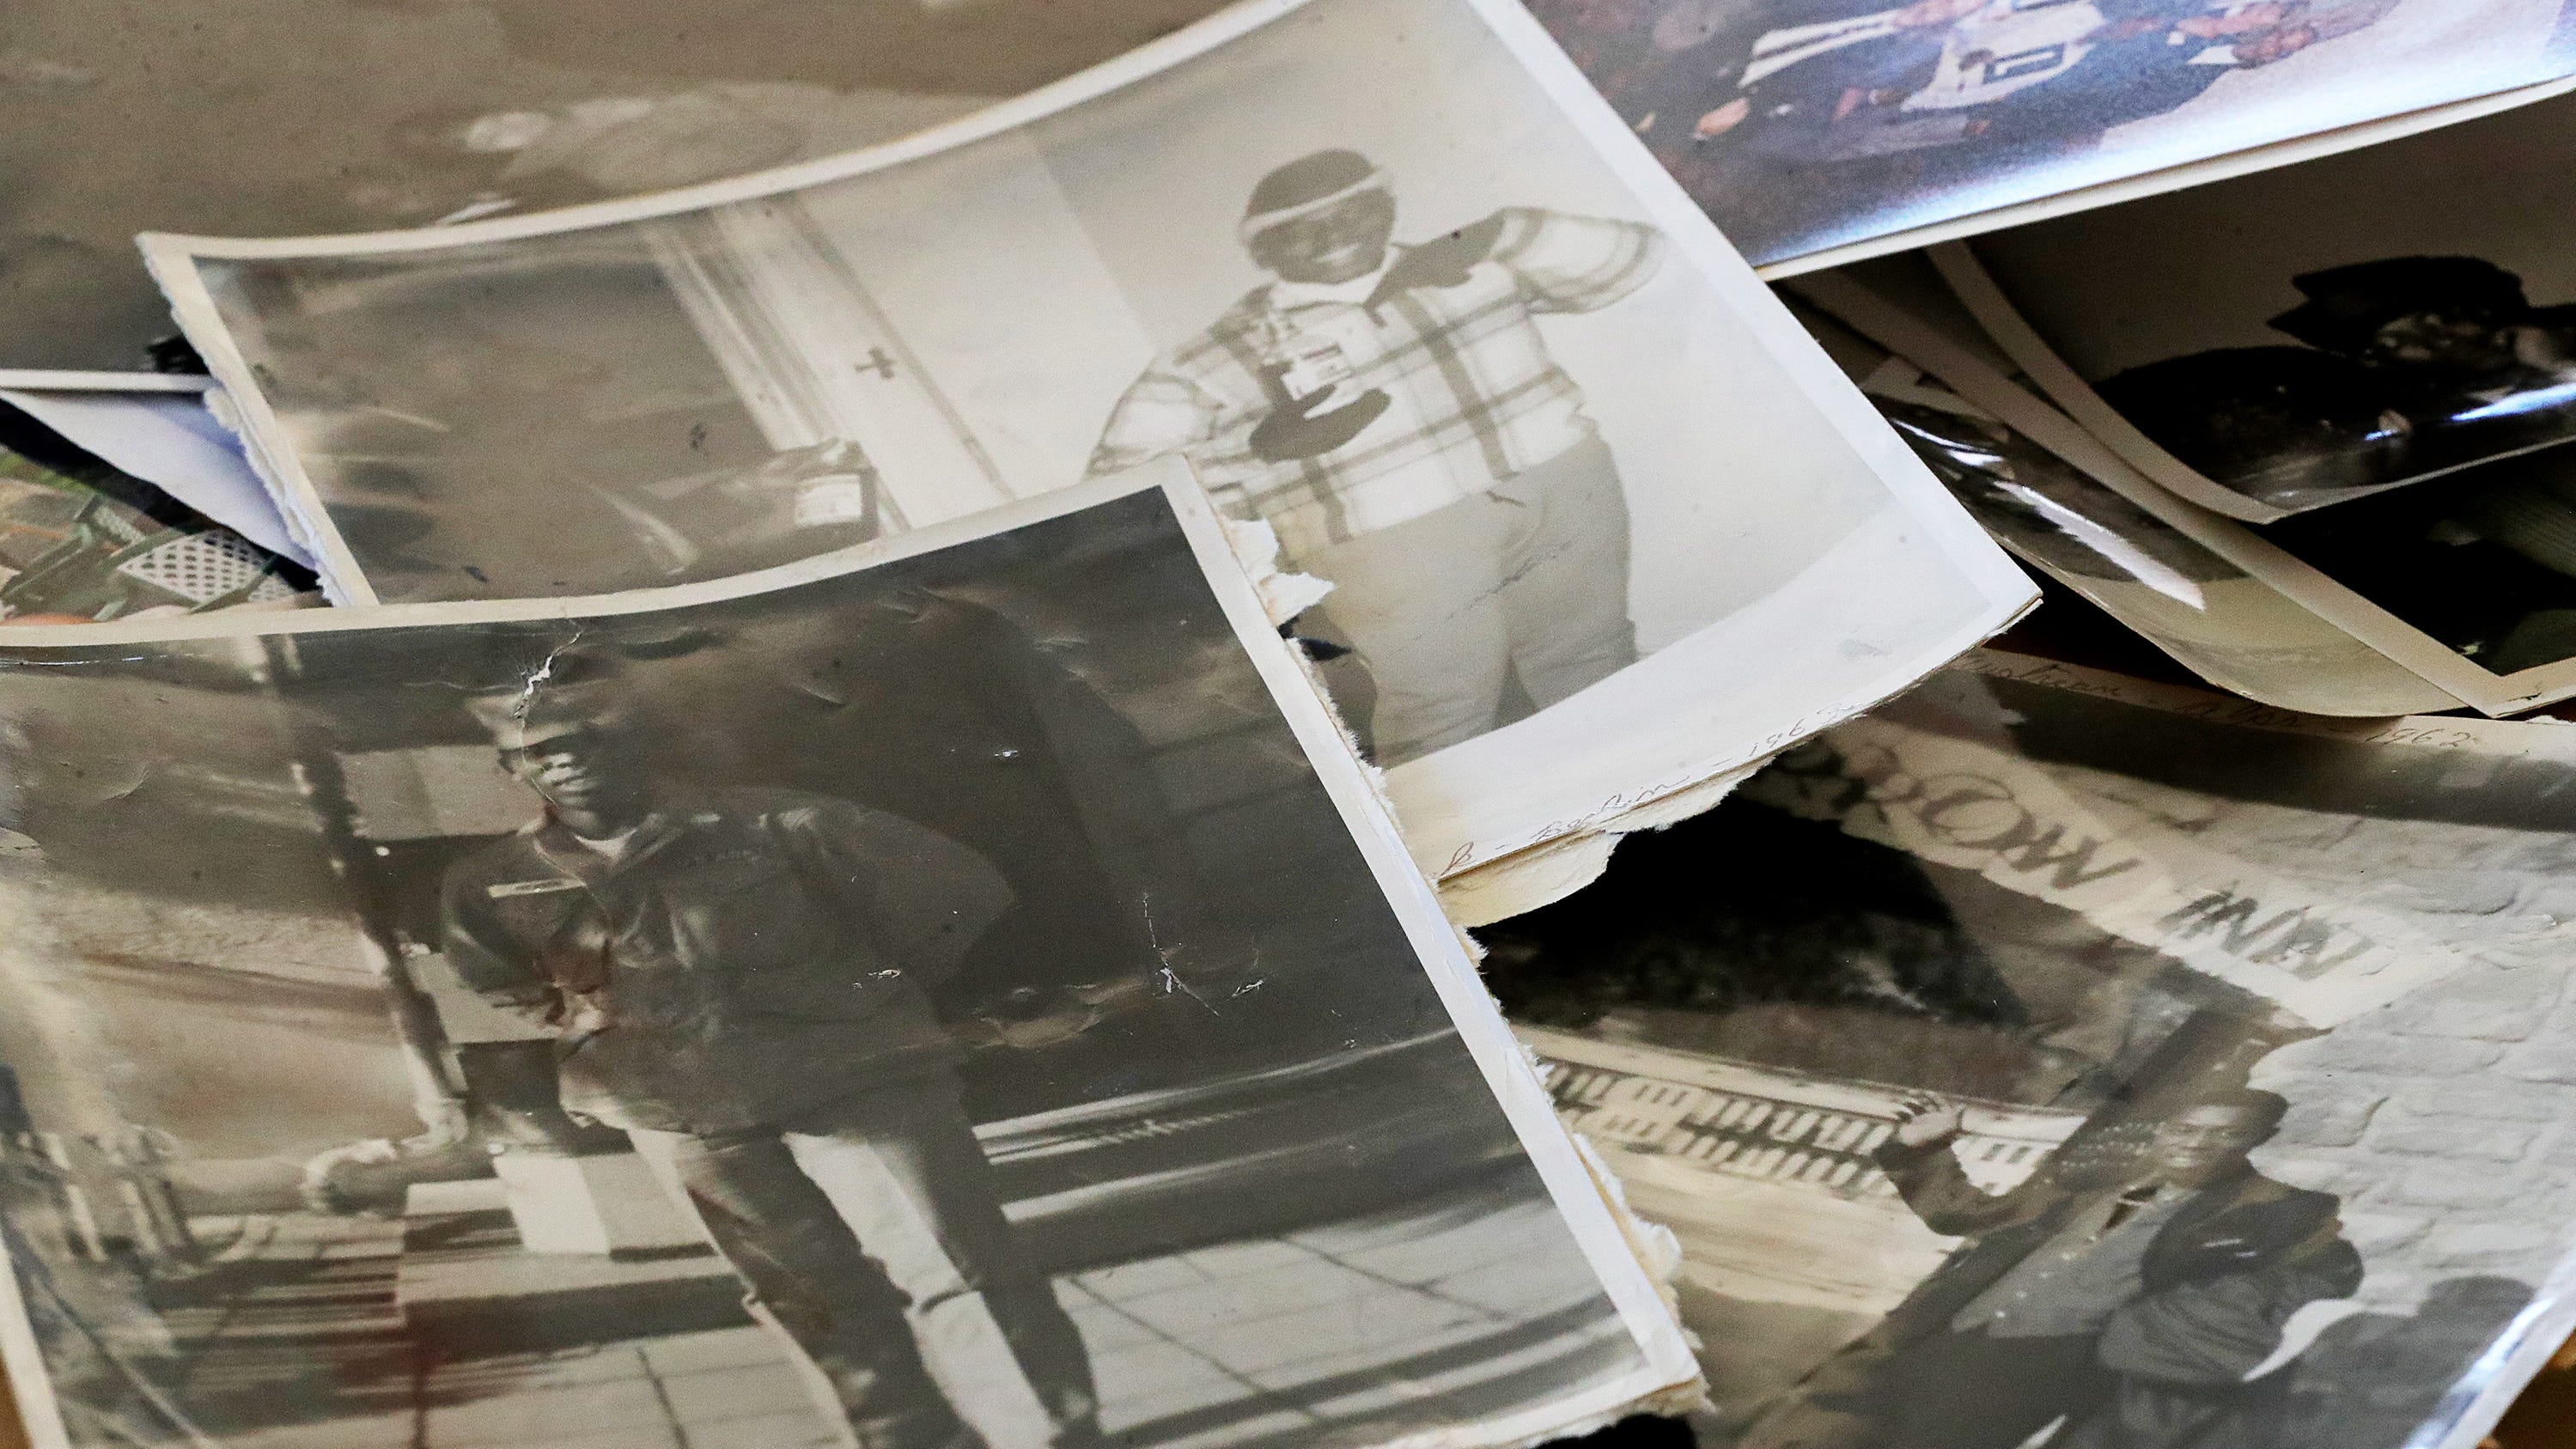 Photographs of U.S. Army veteran Moses Herrin's travels are scattered on a table.